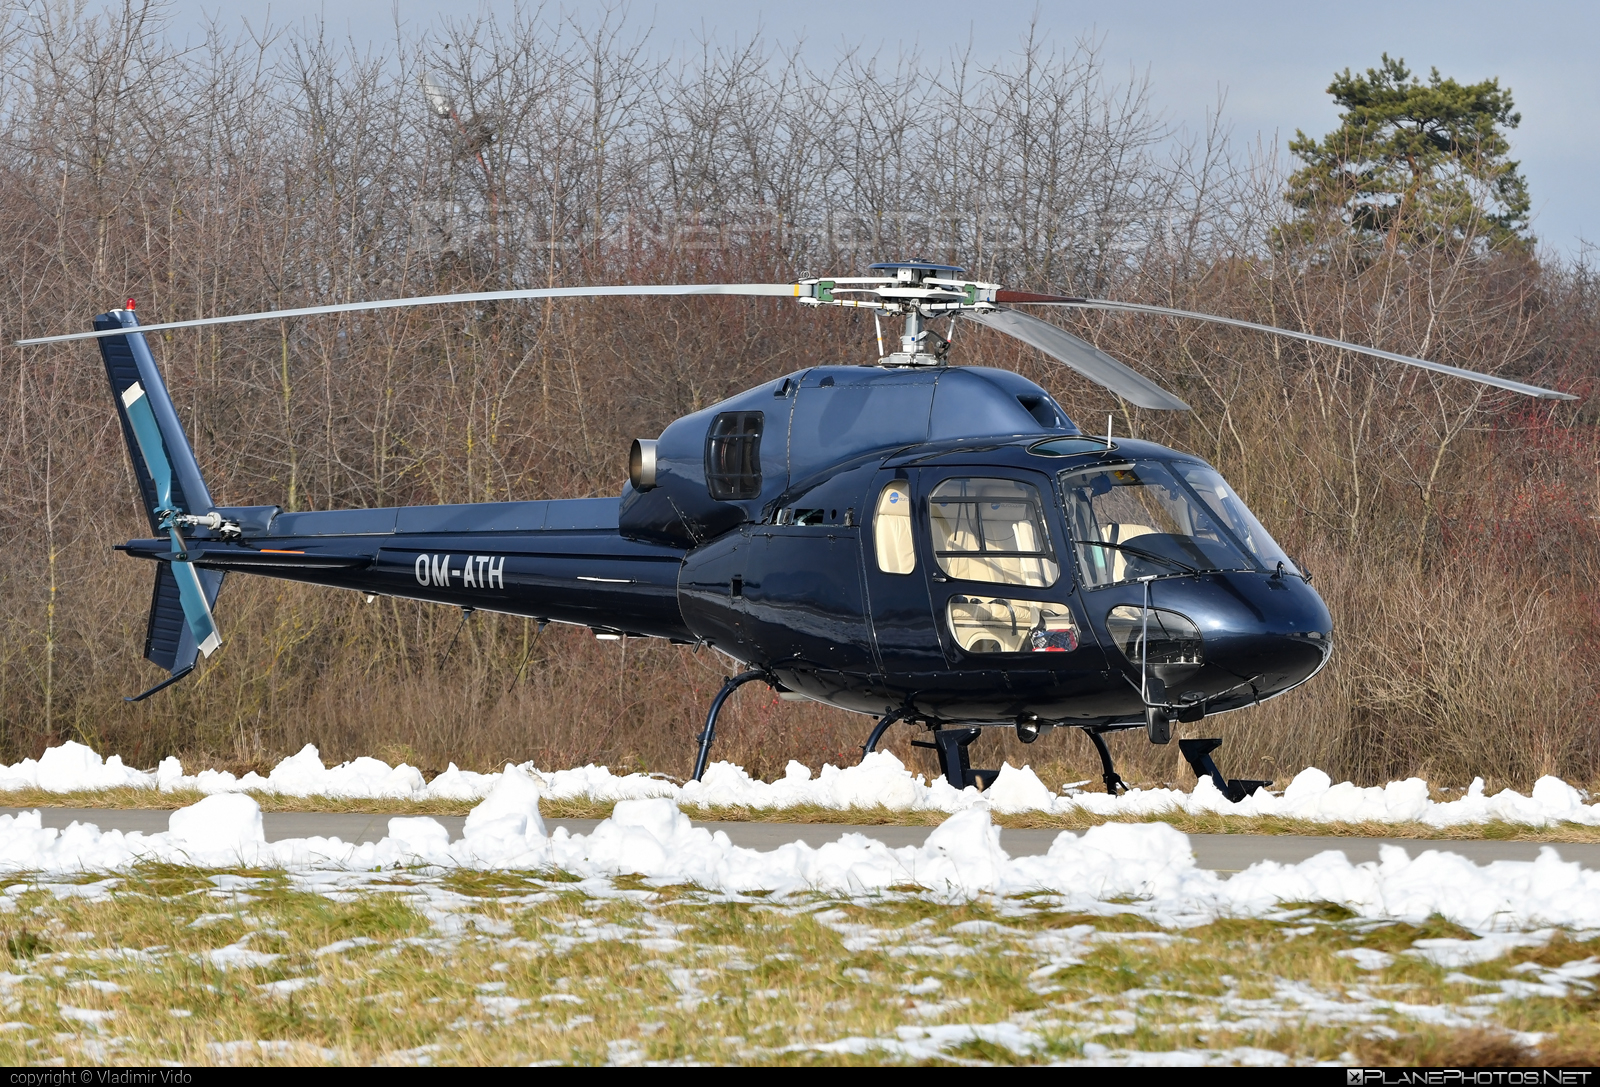 Eurocopter AS355 N Ecureuil 2 - OM-ATH operated by Air Transport Europe #aerospatialeecureuil #airtransporteurope #as355 #as355ecureuil2 #as355n #as355necureuil2 #ecureuil2 #eurocopter #eurocopterecureuil